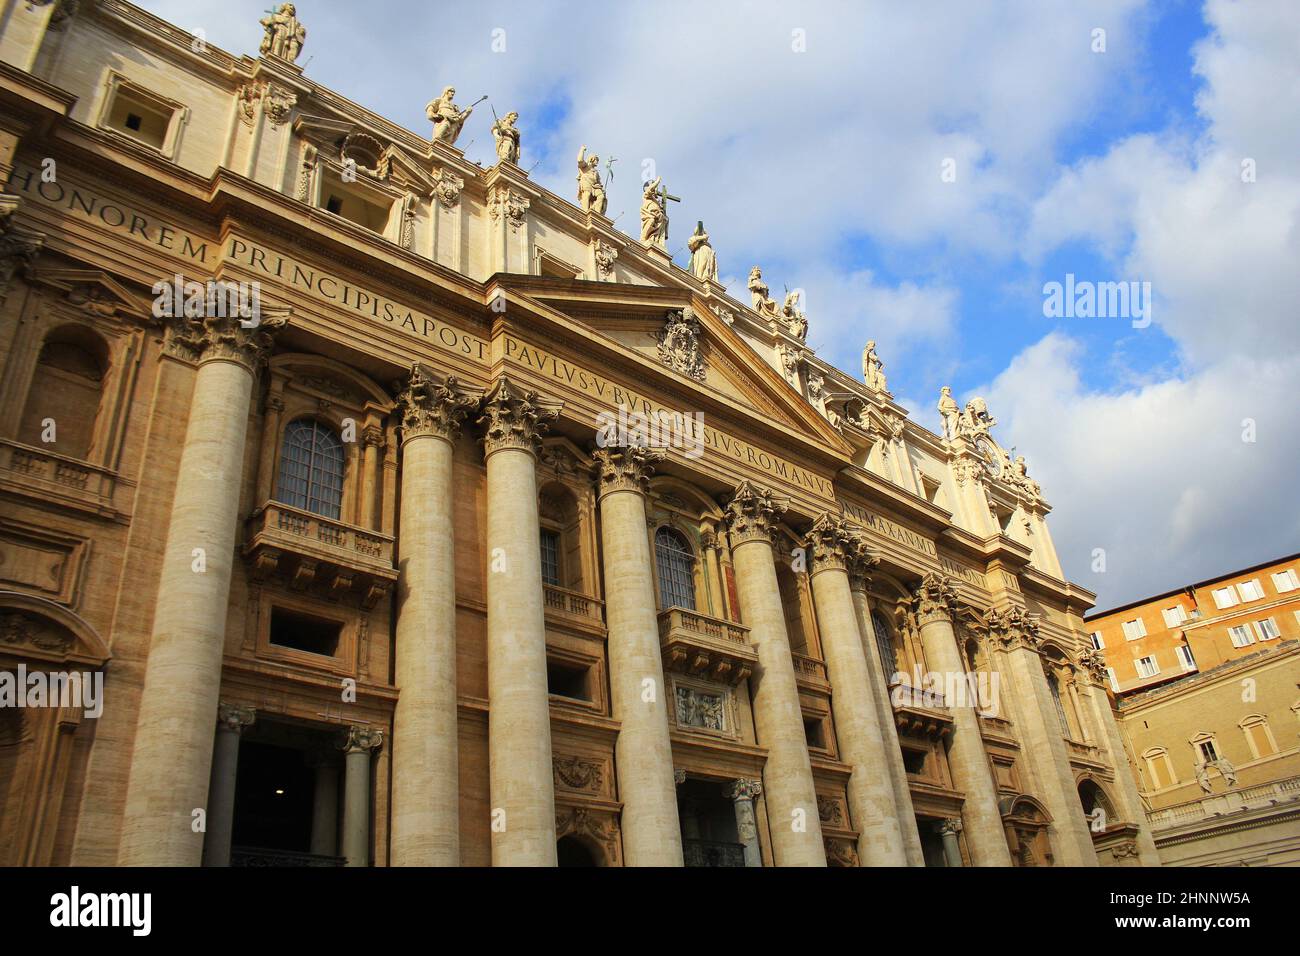 St Peter's basilica in Vatican, Rome Stock Photo